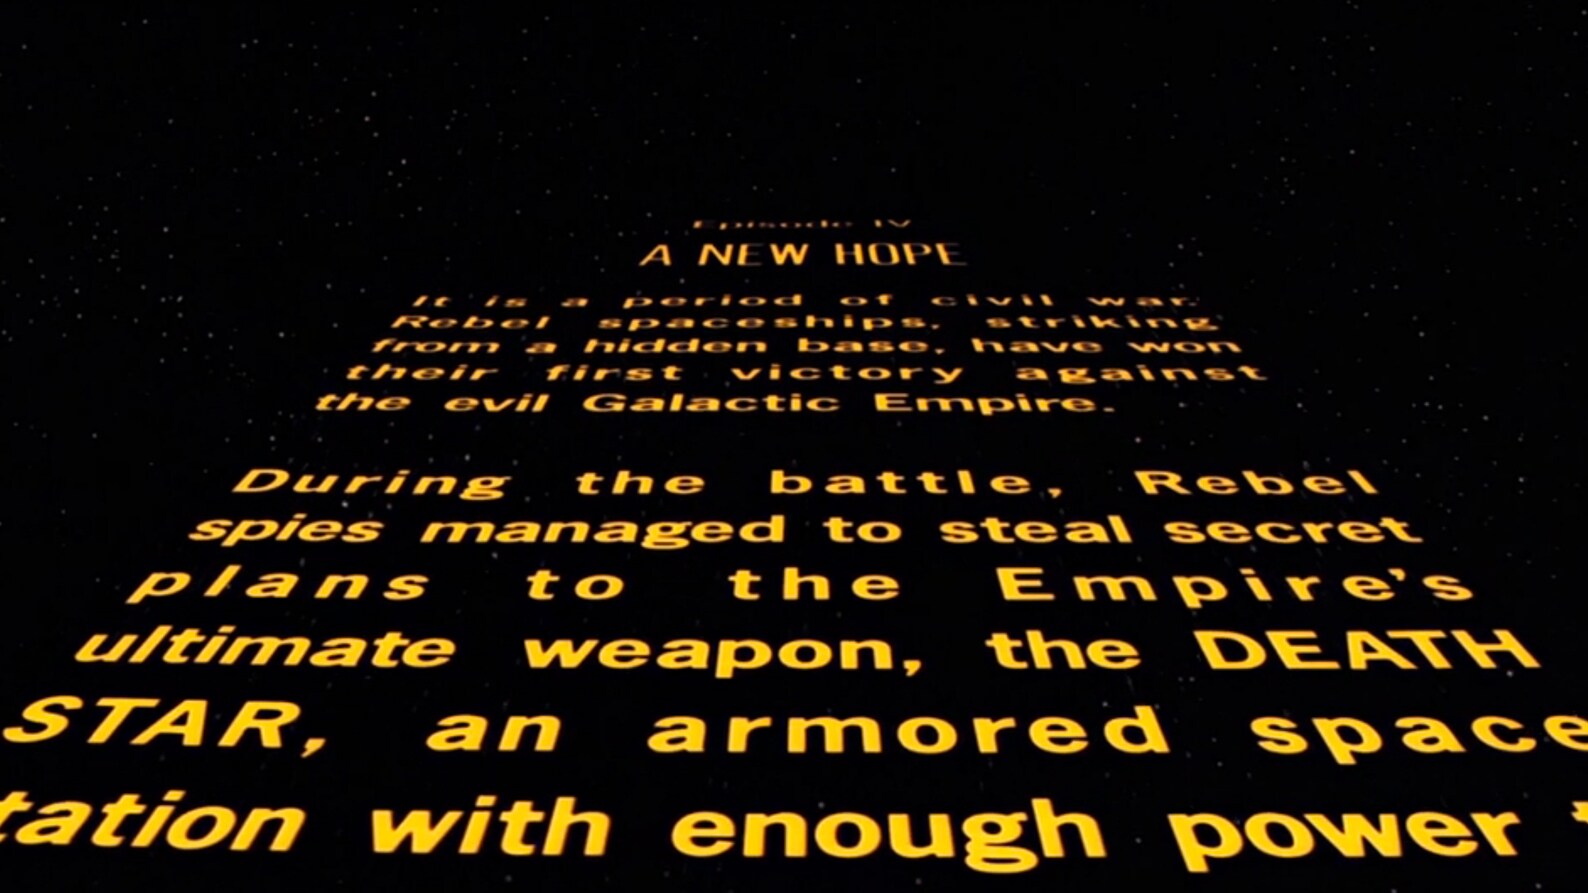 Star Wars Episode IV A New Hope Opening Crawl